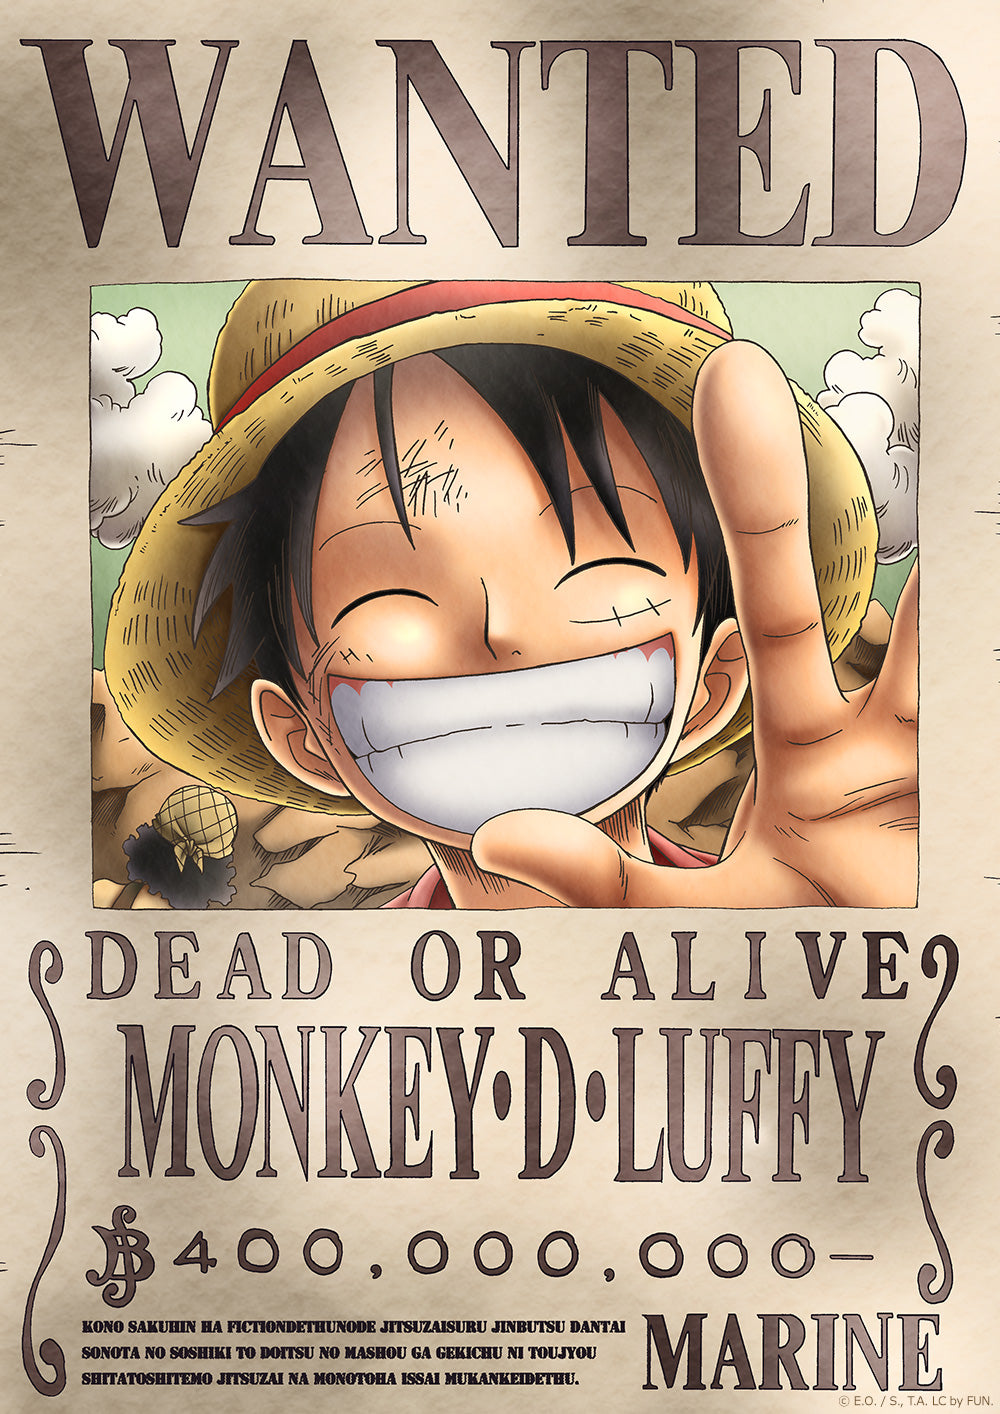 ONE PIECE WANTED:  Dead or Alive Poster: Luffy ( Official Licensed )